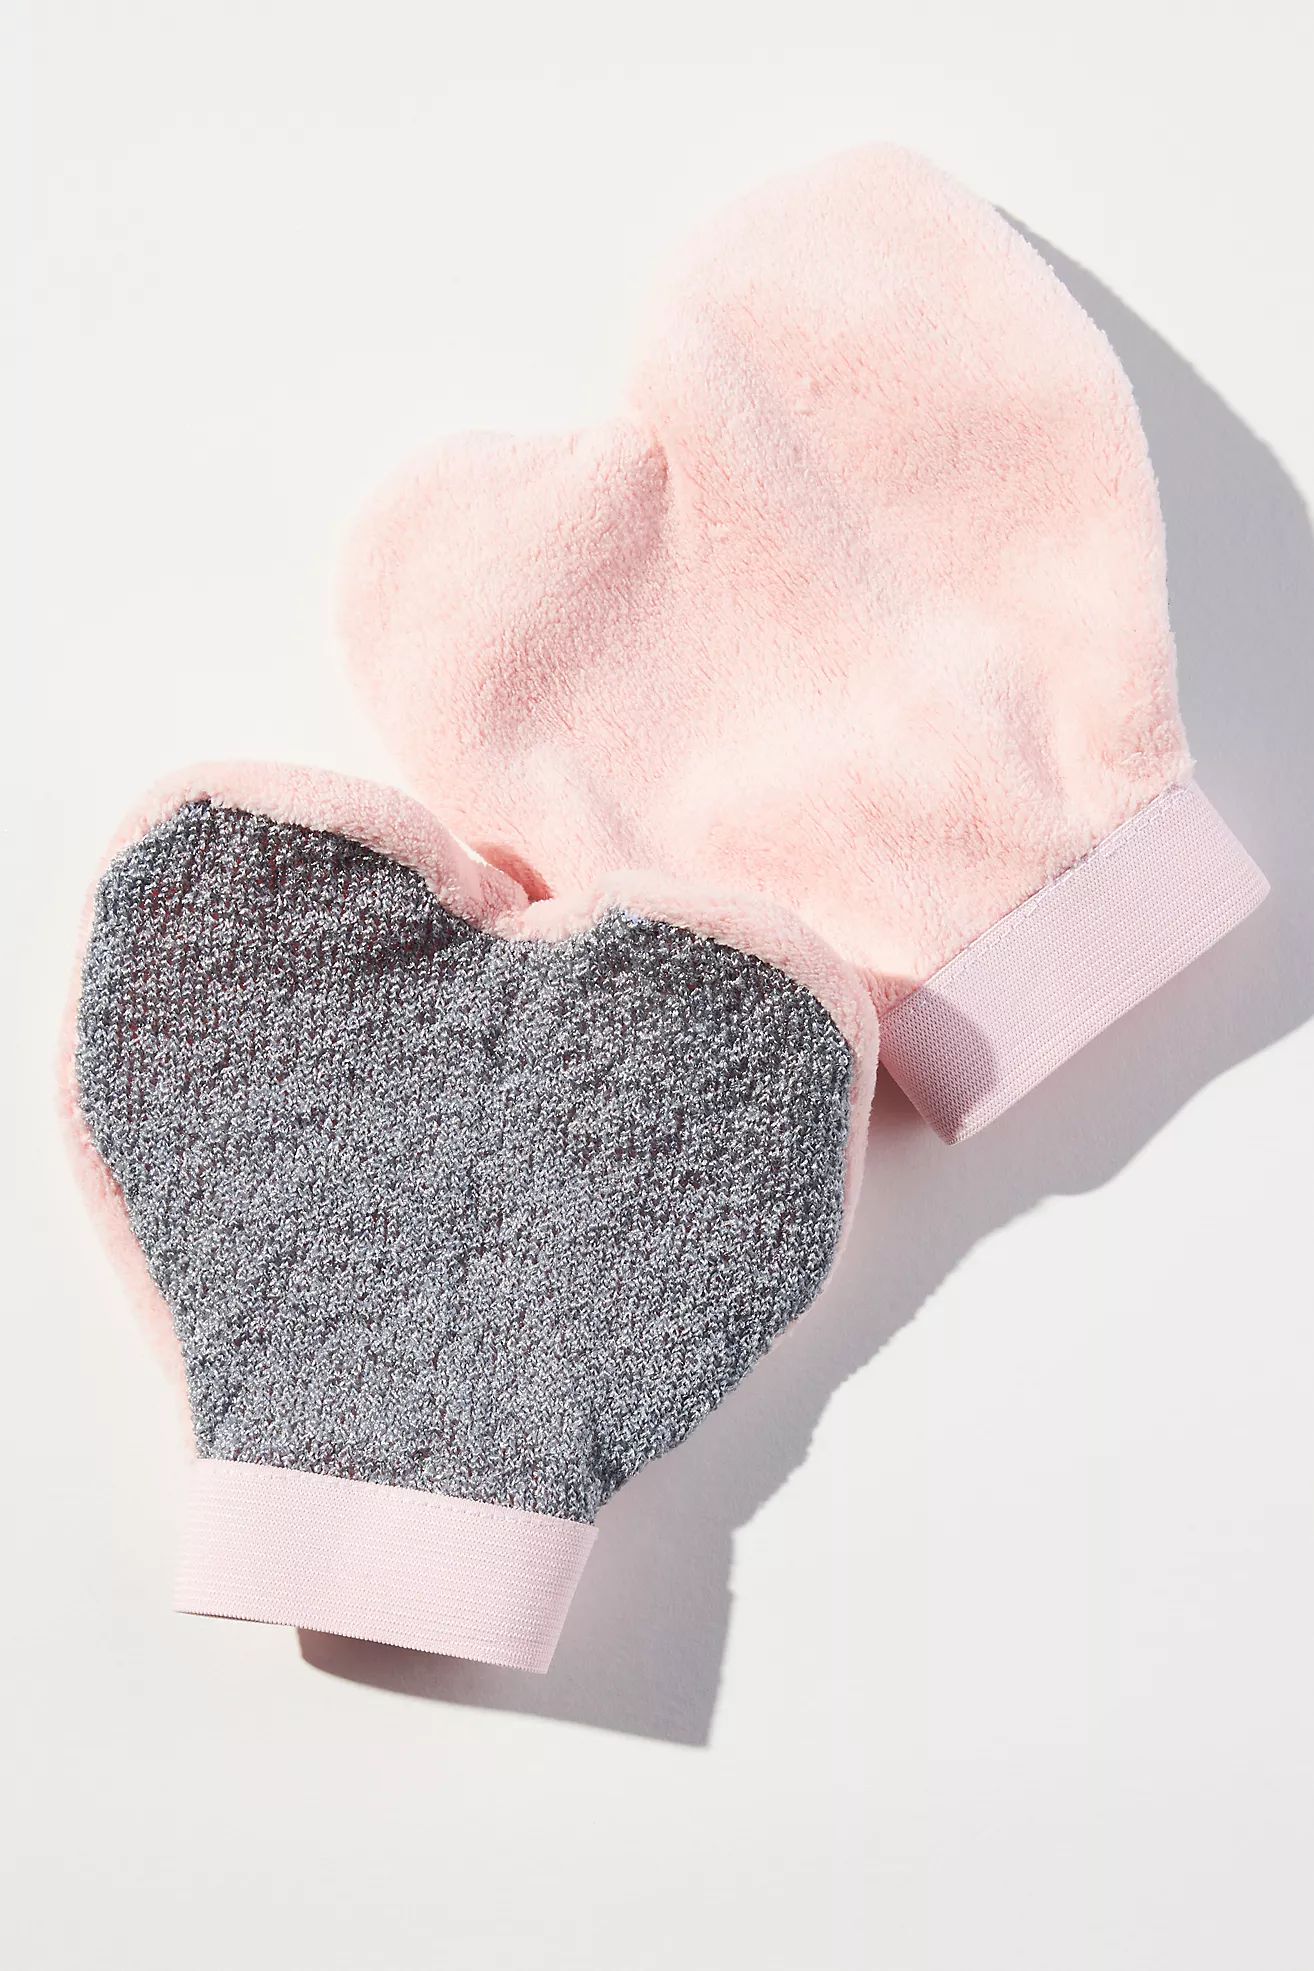 Cloth In A Box Glove It | Anthropologie (US)